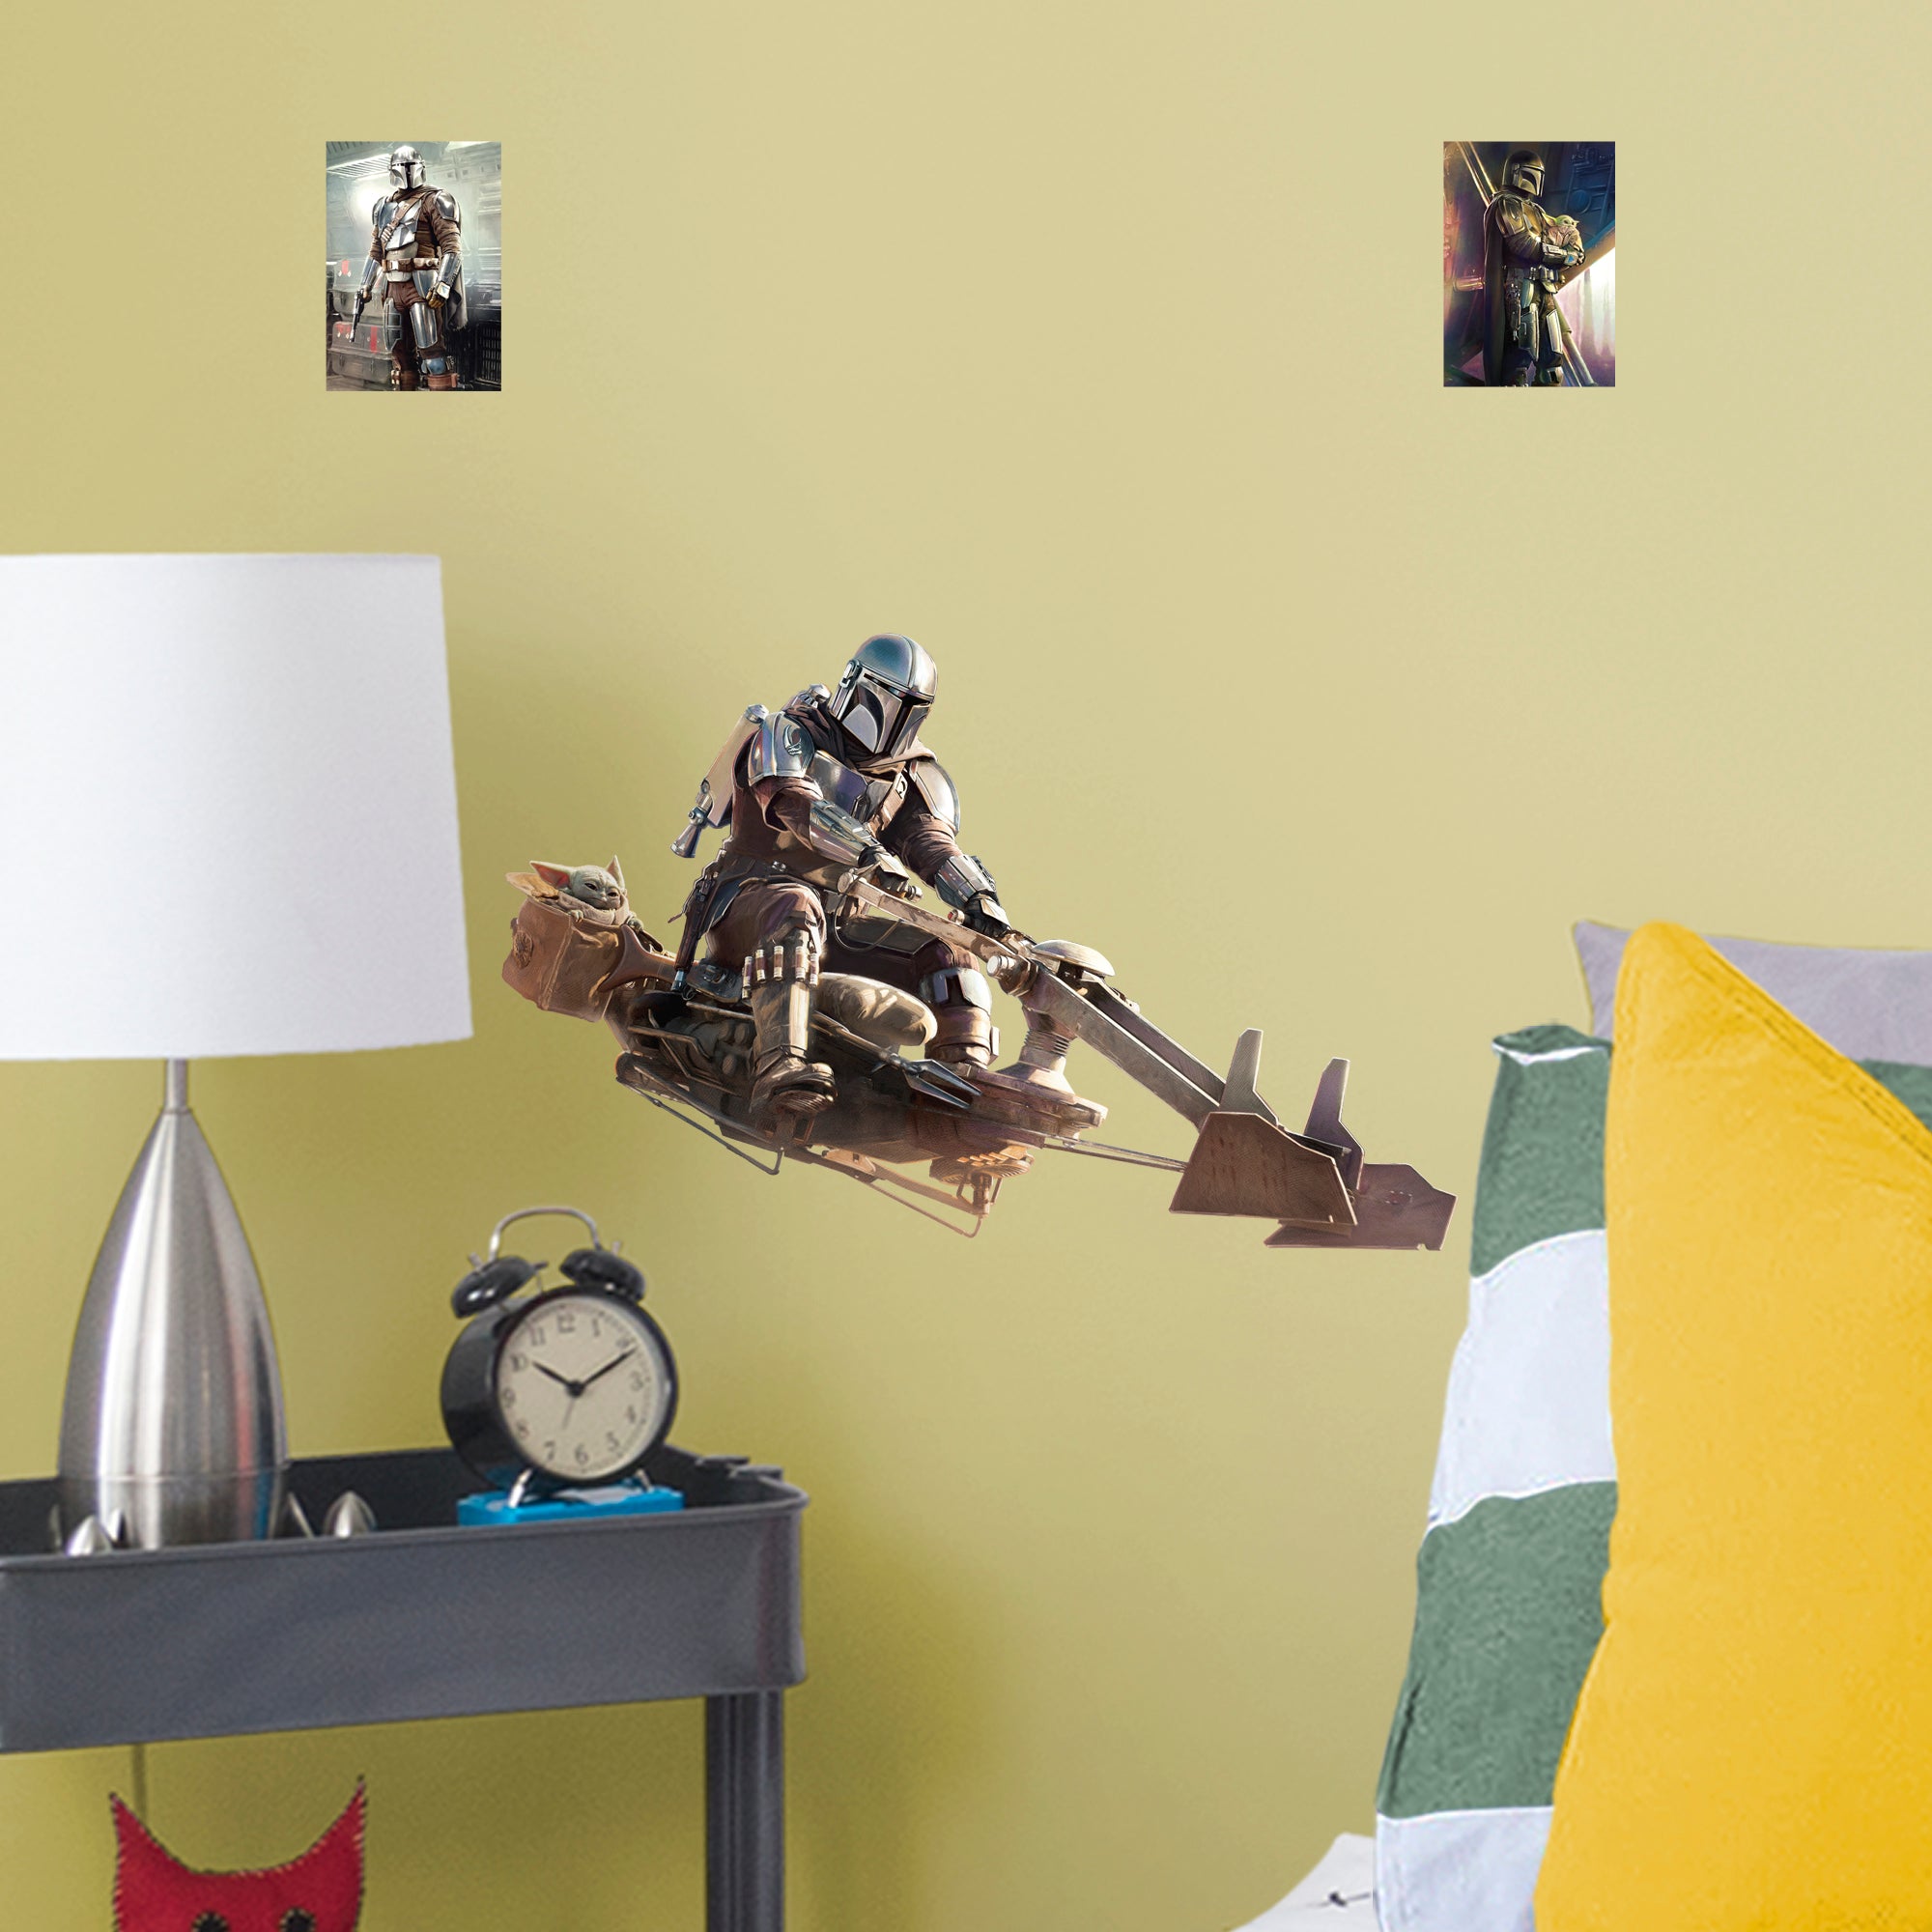 The Mandalorian and Child Speeder Bike - Officially Licensed Star Wars Removable Wall Decal Large by Fathead | Vinyl